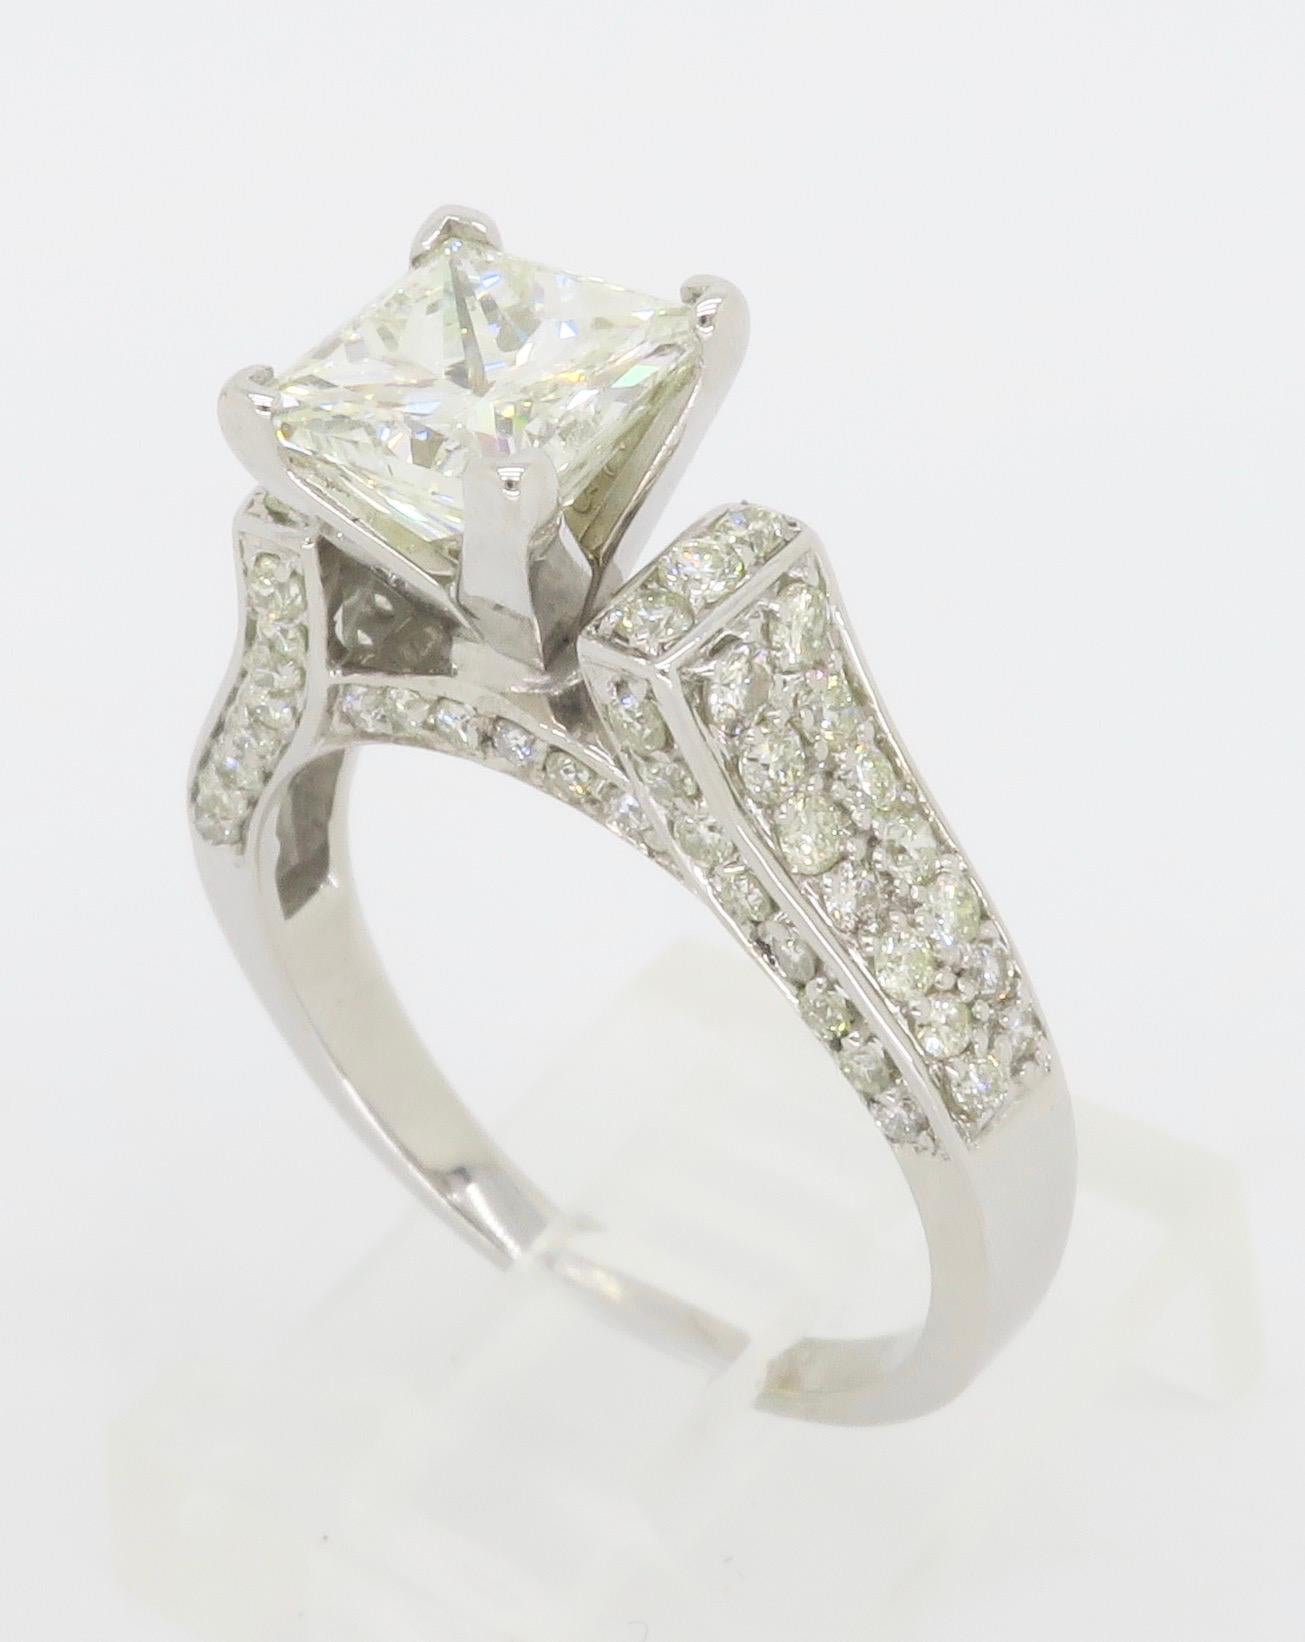 Certified 2.59ctw Princess Cut Diamond Engagement Ring For Sale 12